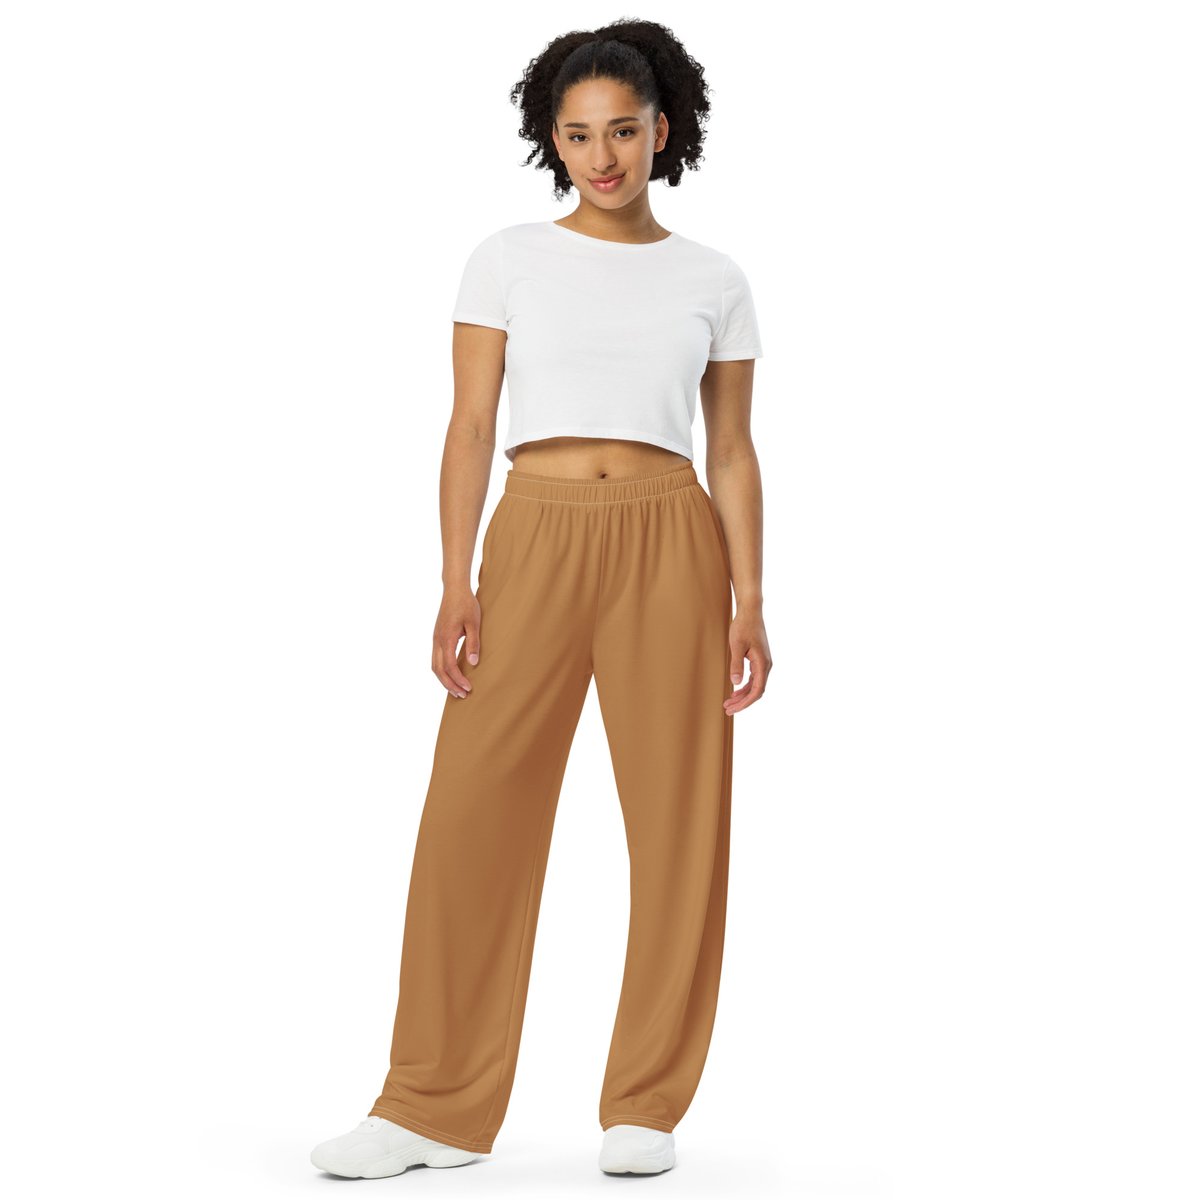 👖 All-Occasion Wide-Leg Pants - Unisex Tan Edition 👖 All day from work to play, these comfy pants are THE go-to wardrobe choice for every occasion.. Get the comfort of pajamas in this stylish pair of wide-leg pants. #alloccasionpants #casualpants openartmediadesign.com/product/brown-…